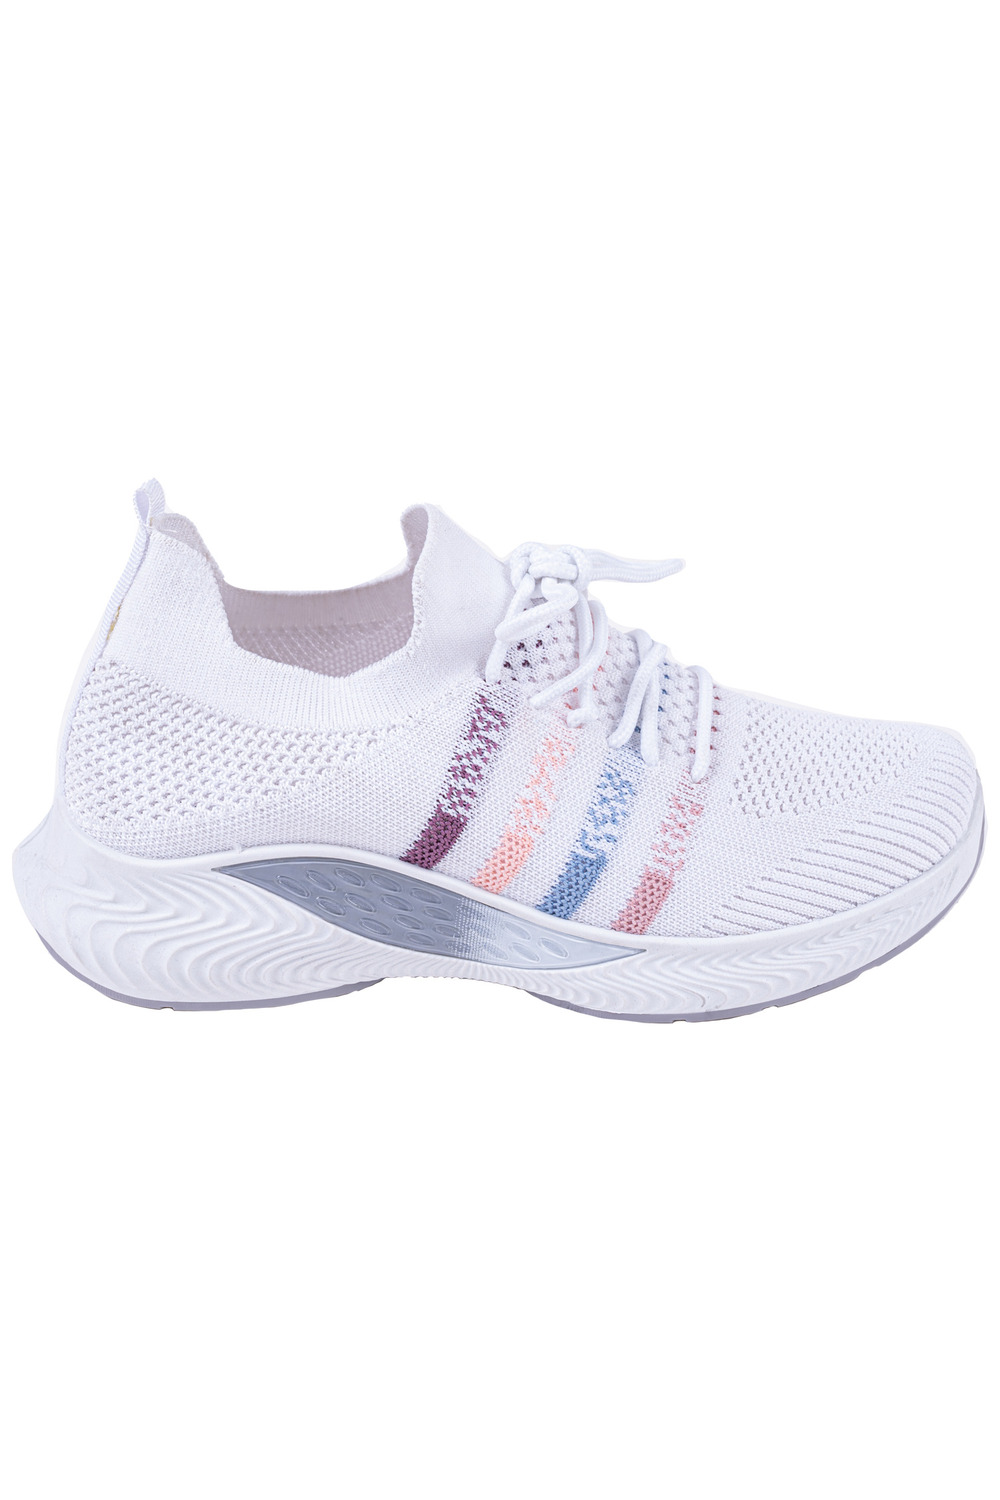 Mesh knit slip-in sneaker with laces - White and stripes